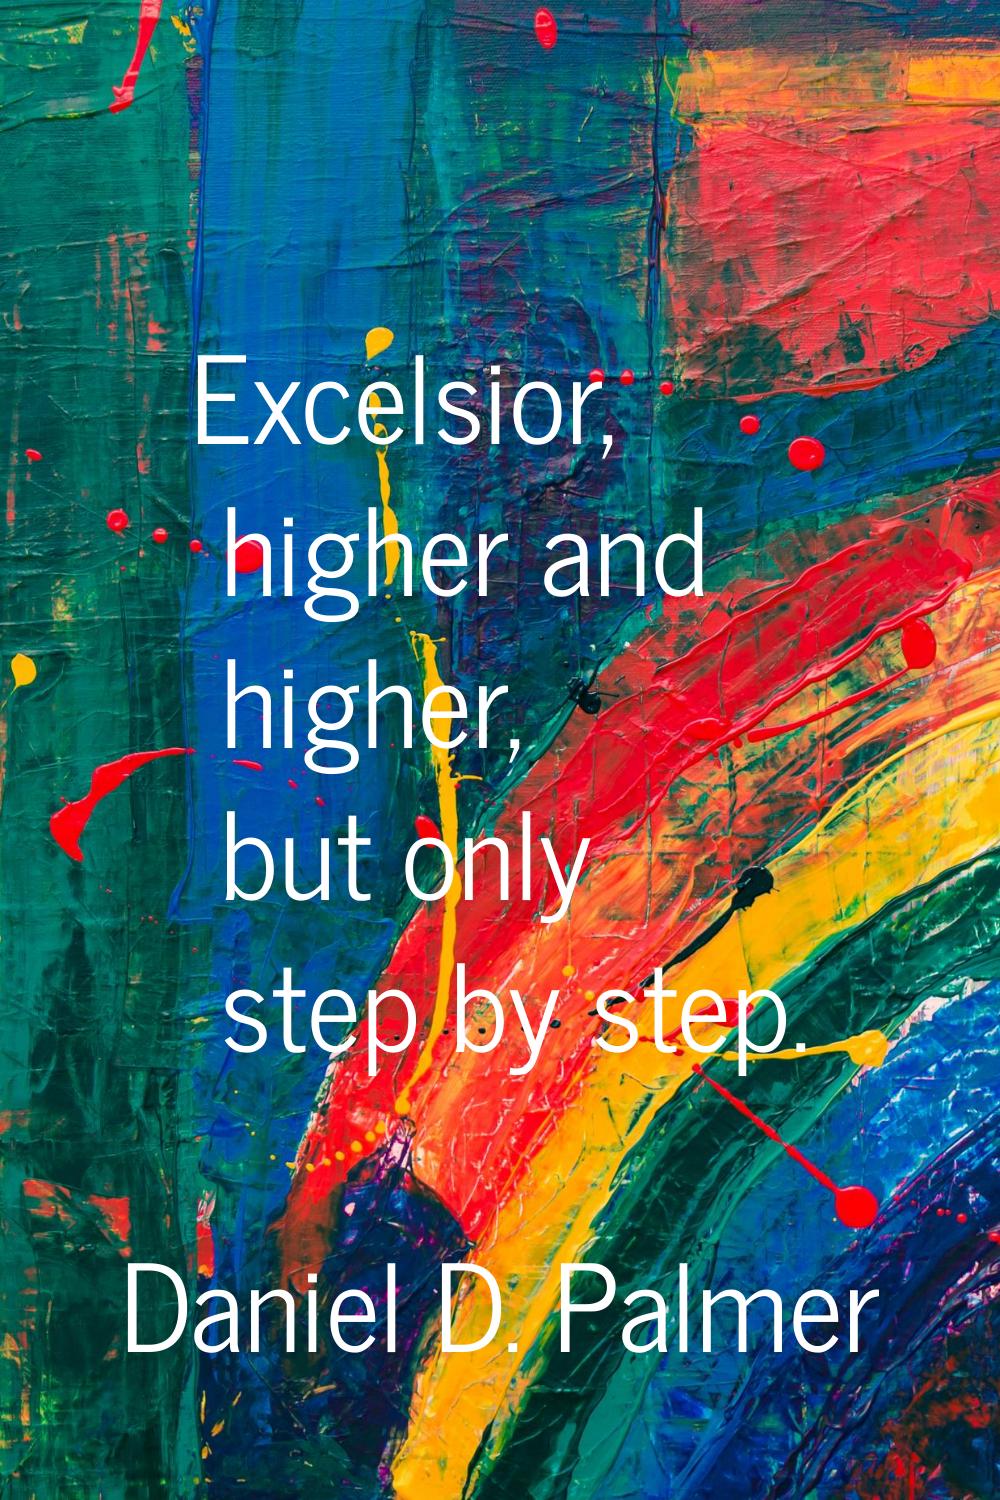 Excelsior, higher and higher, but only step by step.